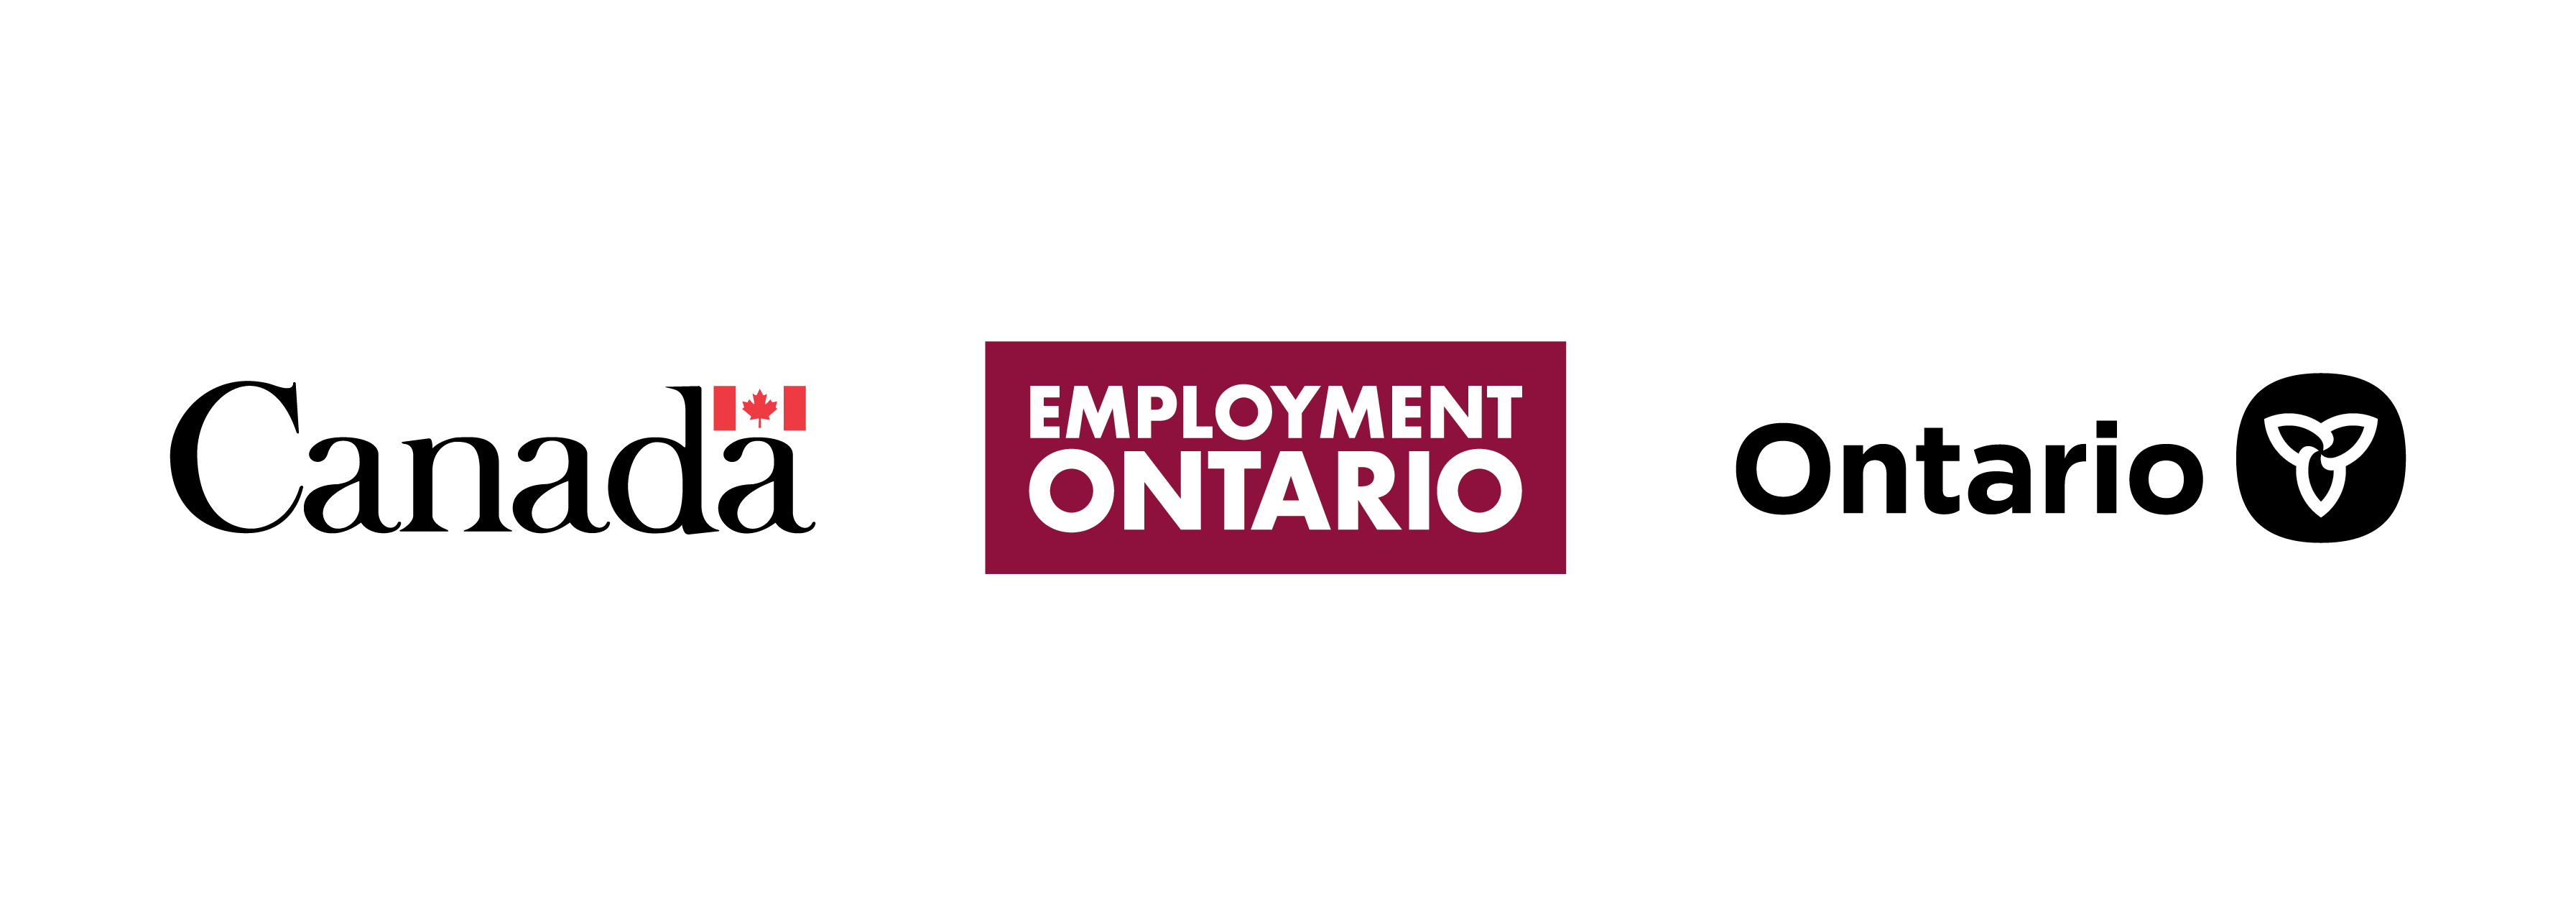 "A block of wordmark identifiers in colour: Symbol of the Government of Canada, Wordmark of Employment Ontario, and Symbol of the Government of Ontario. "